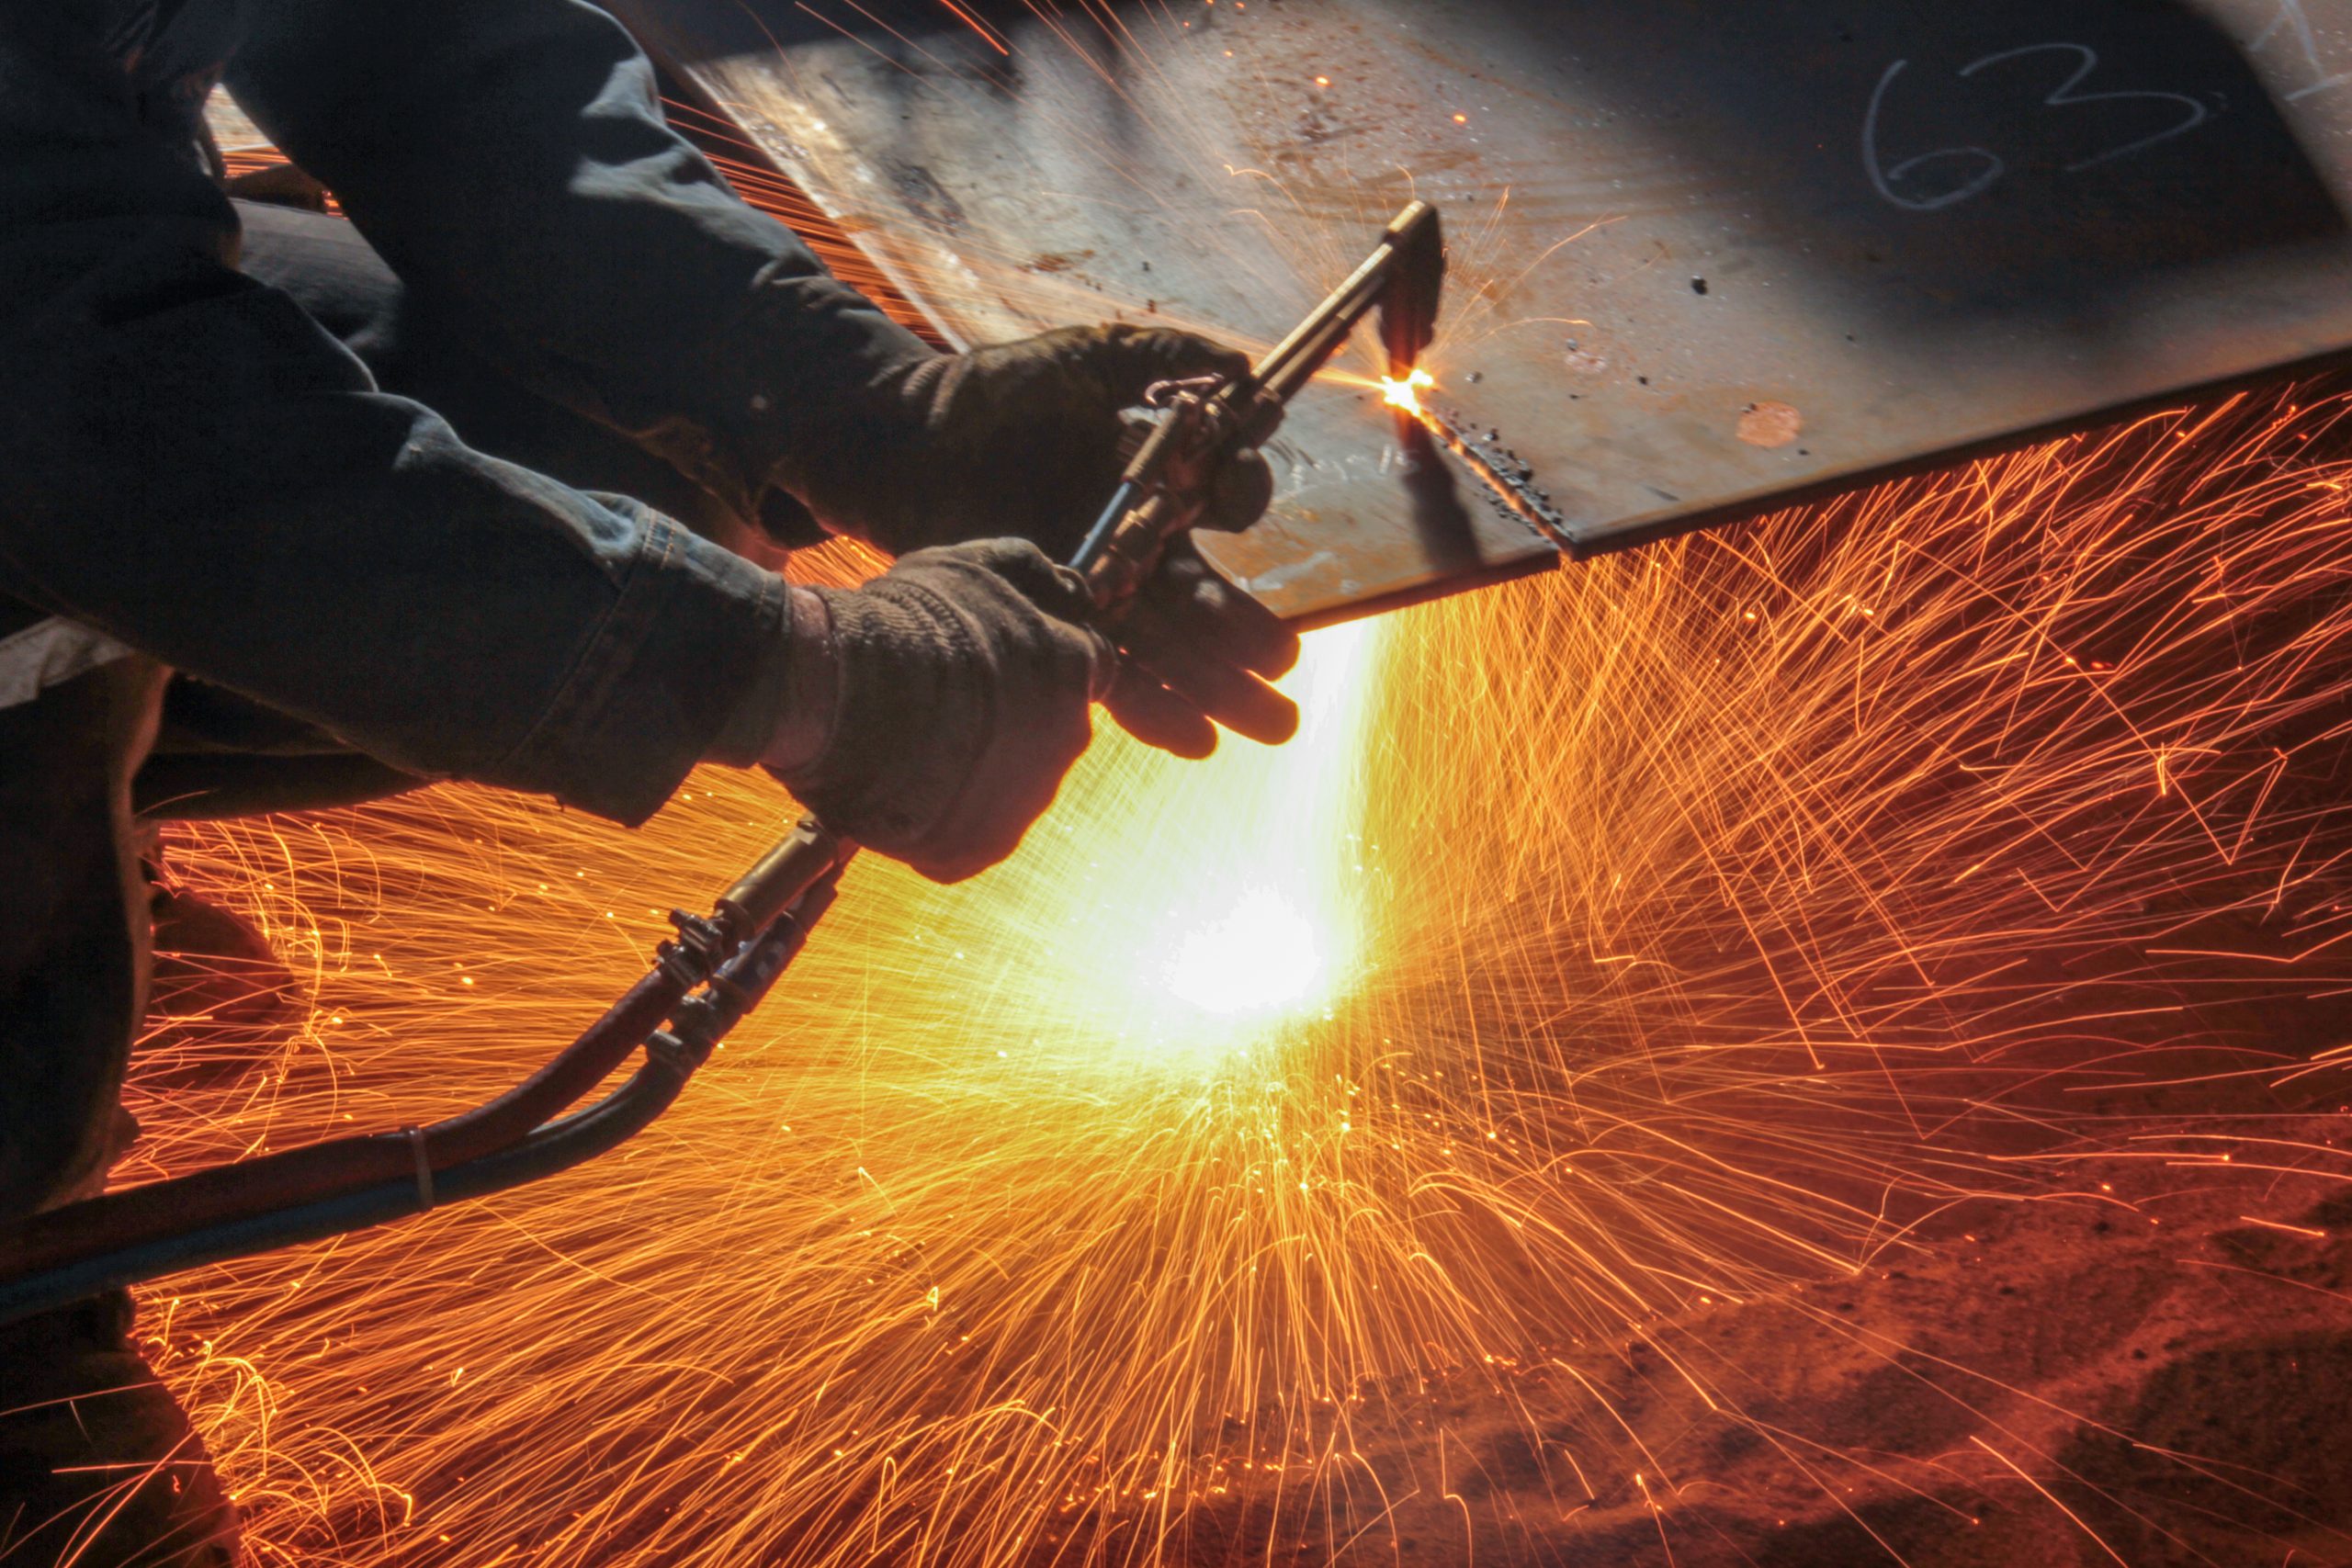 Welding, or gas welding in the U.S. and oxy-fuel cutting are processes that use fuel gases and oxygen to weld and cut metals, respectively.